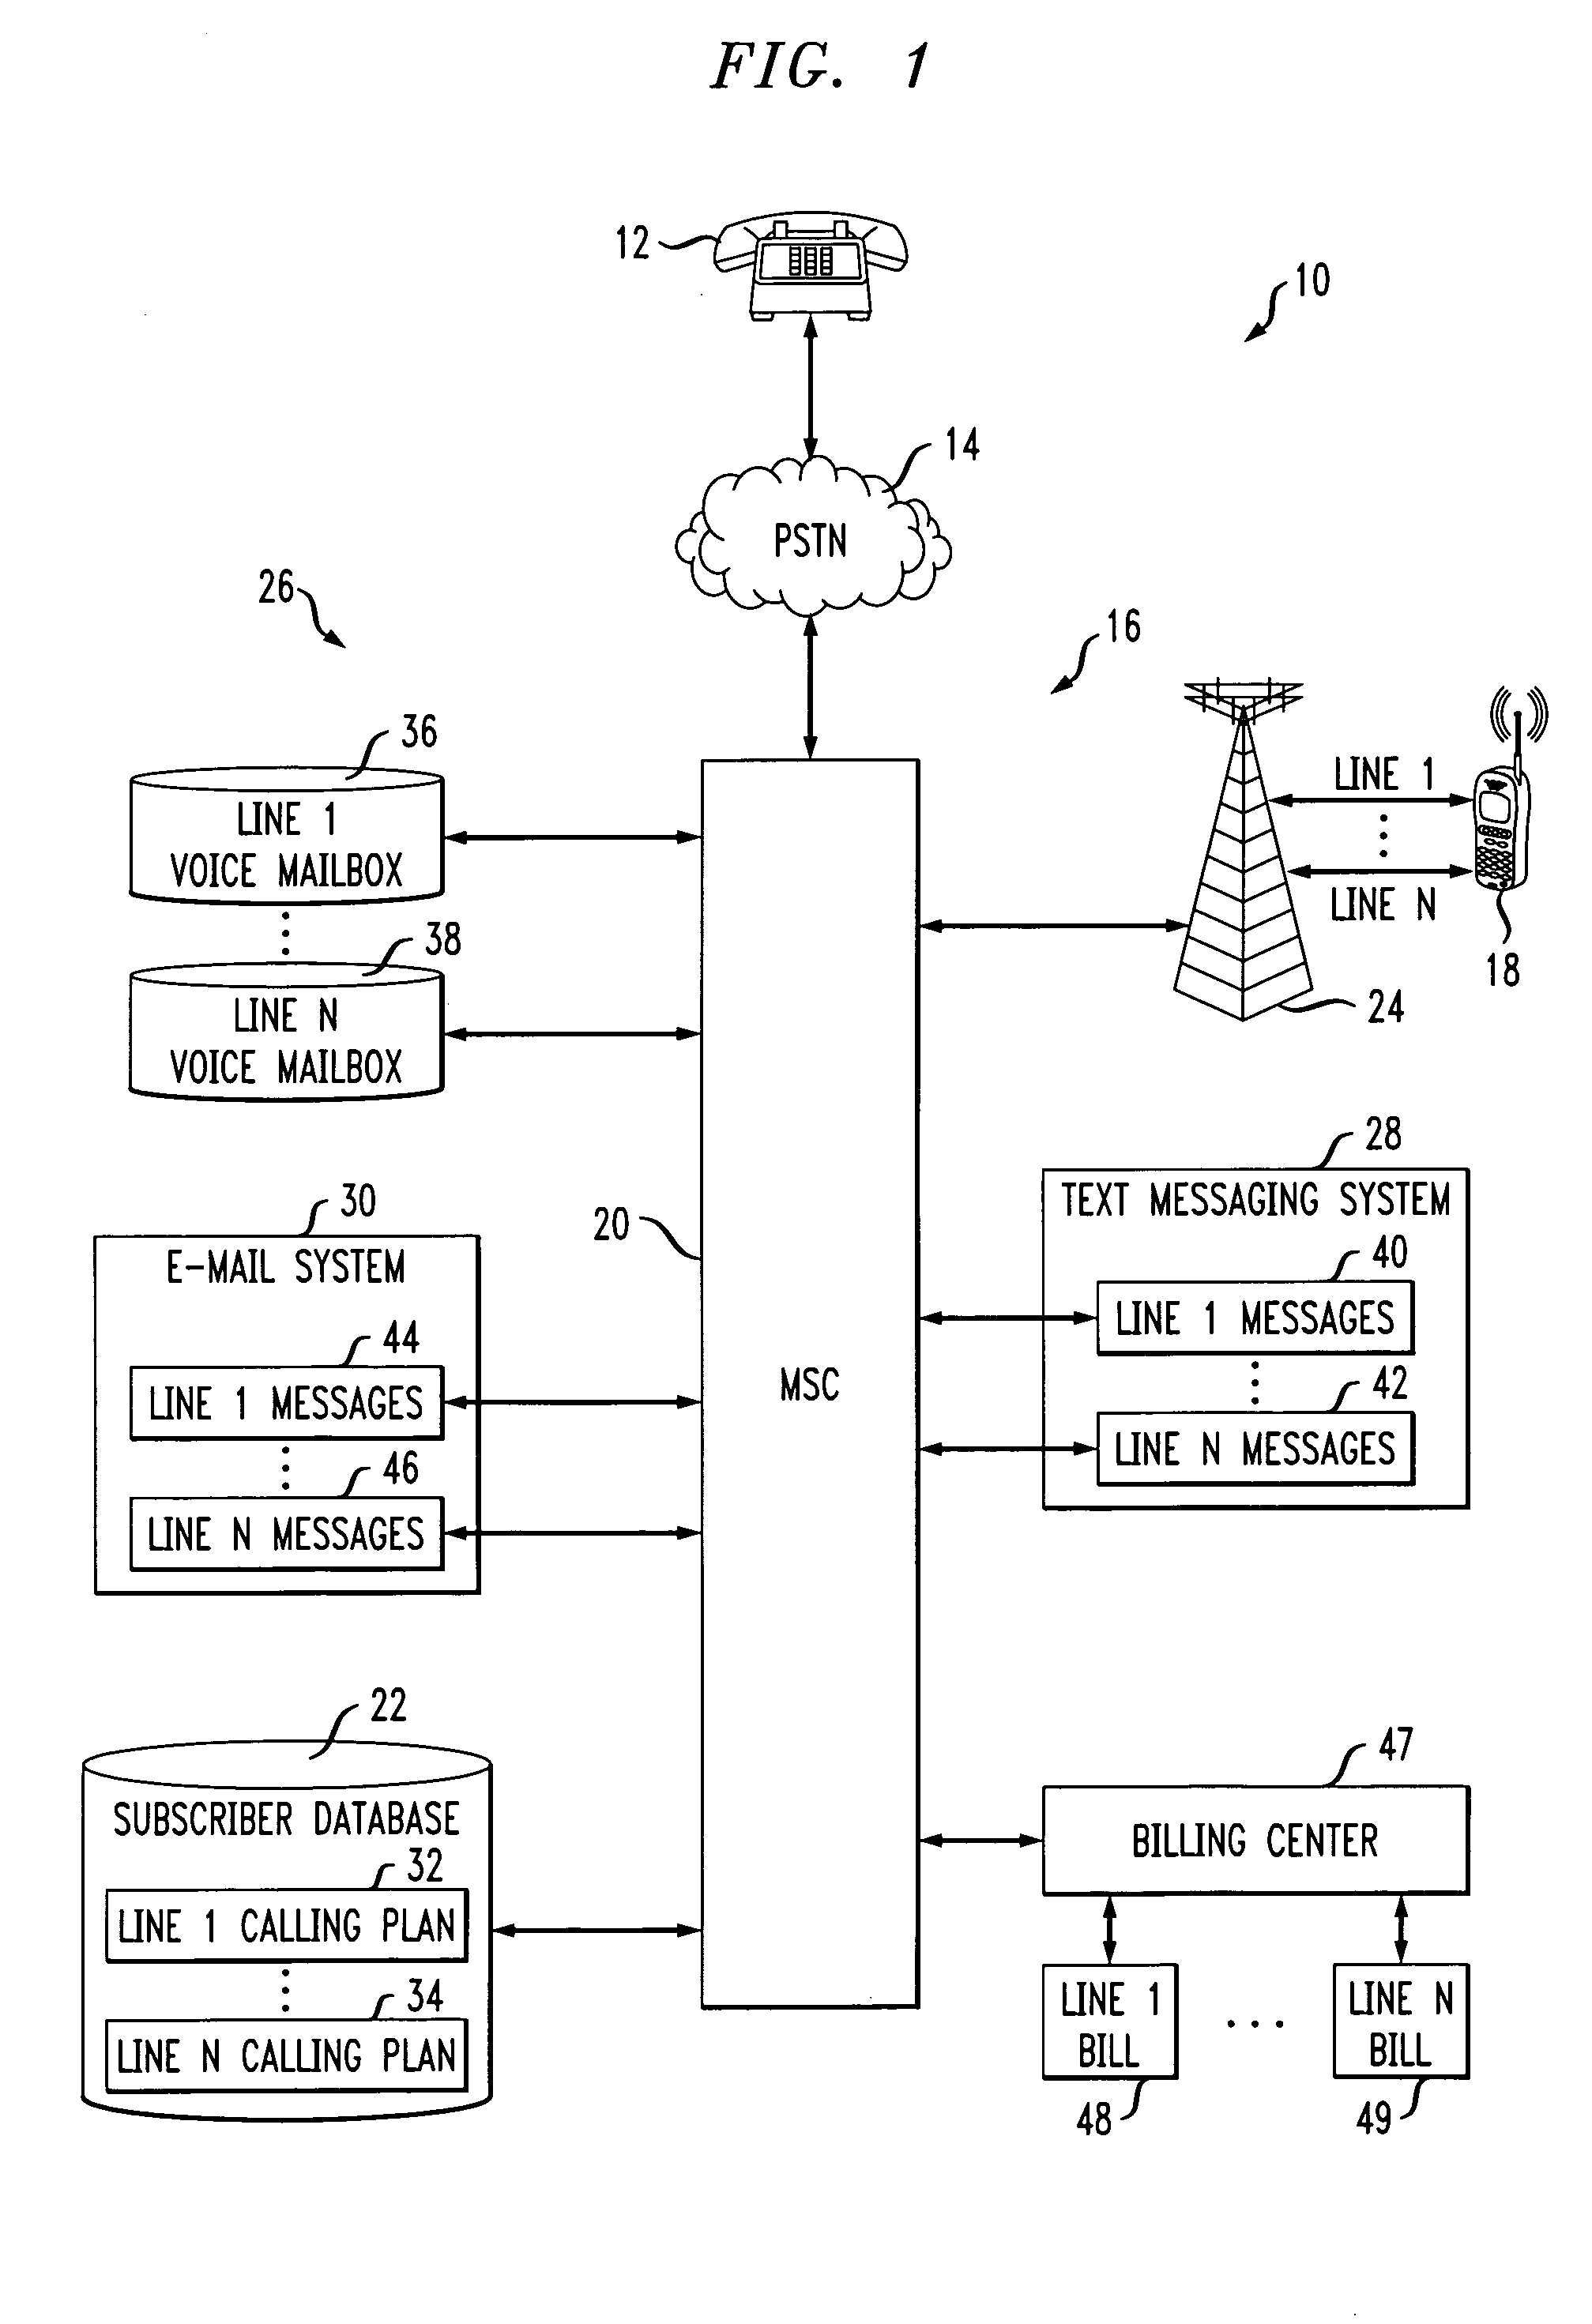 Network support for multi-line mobile device